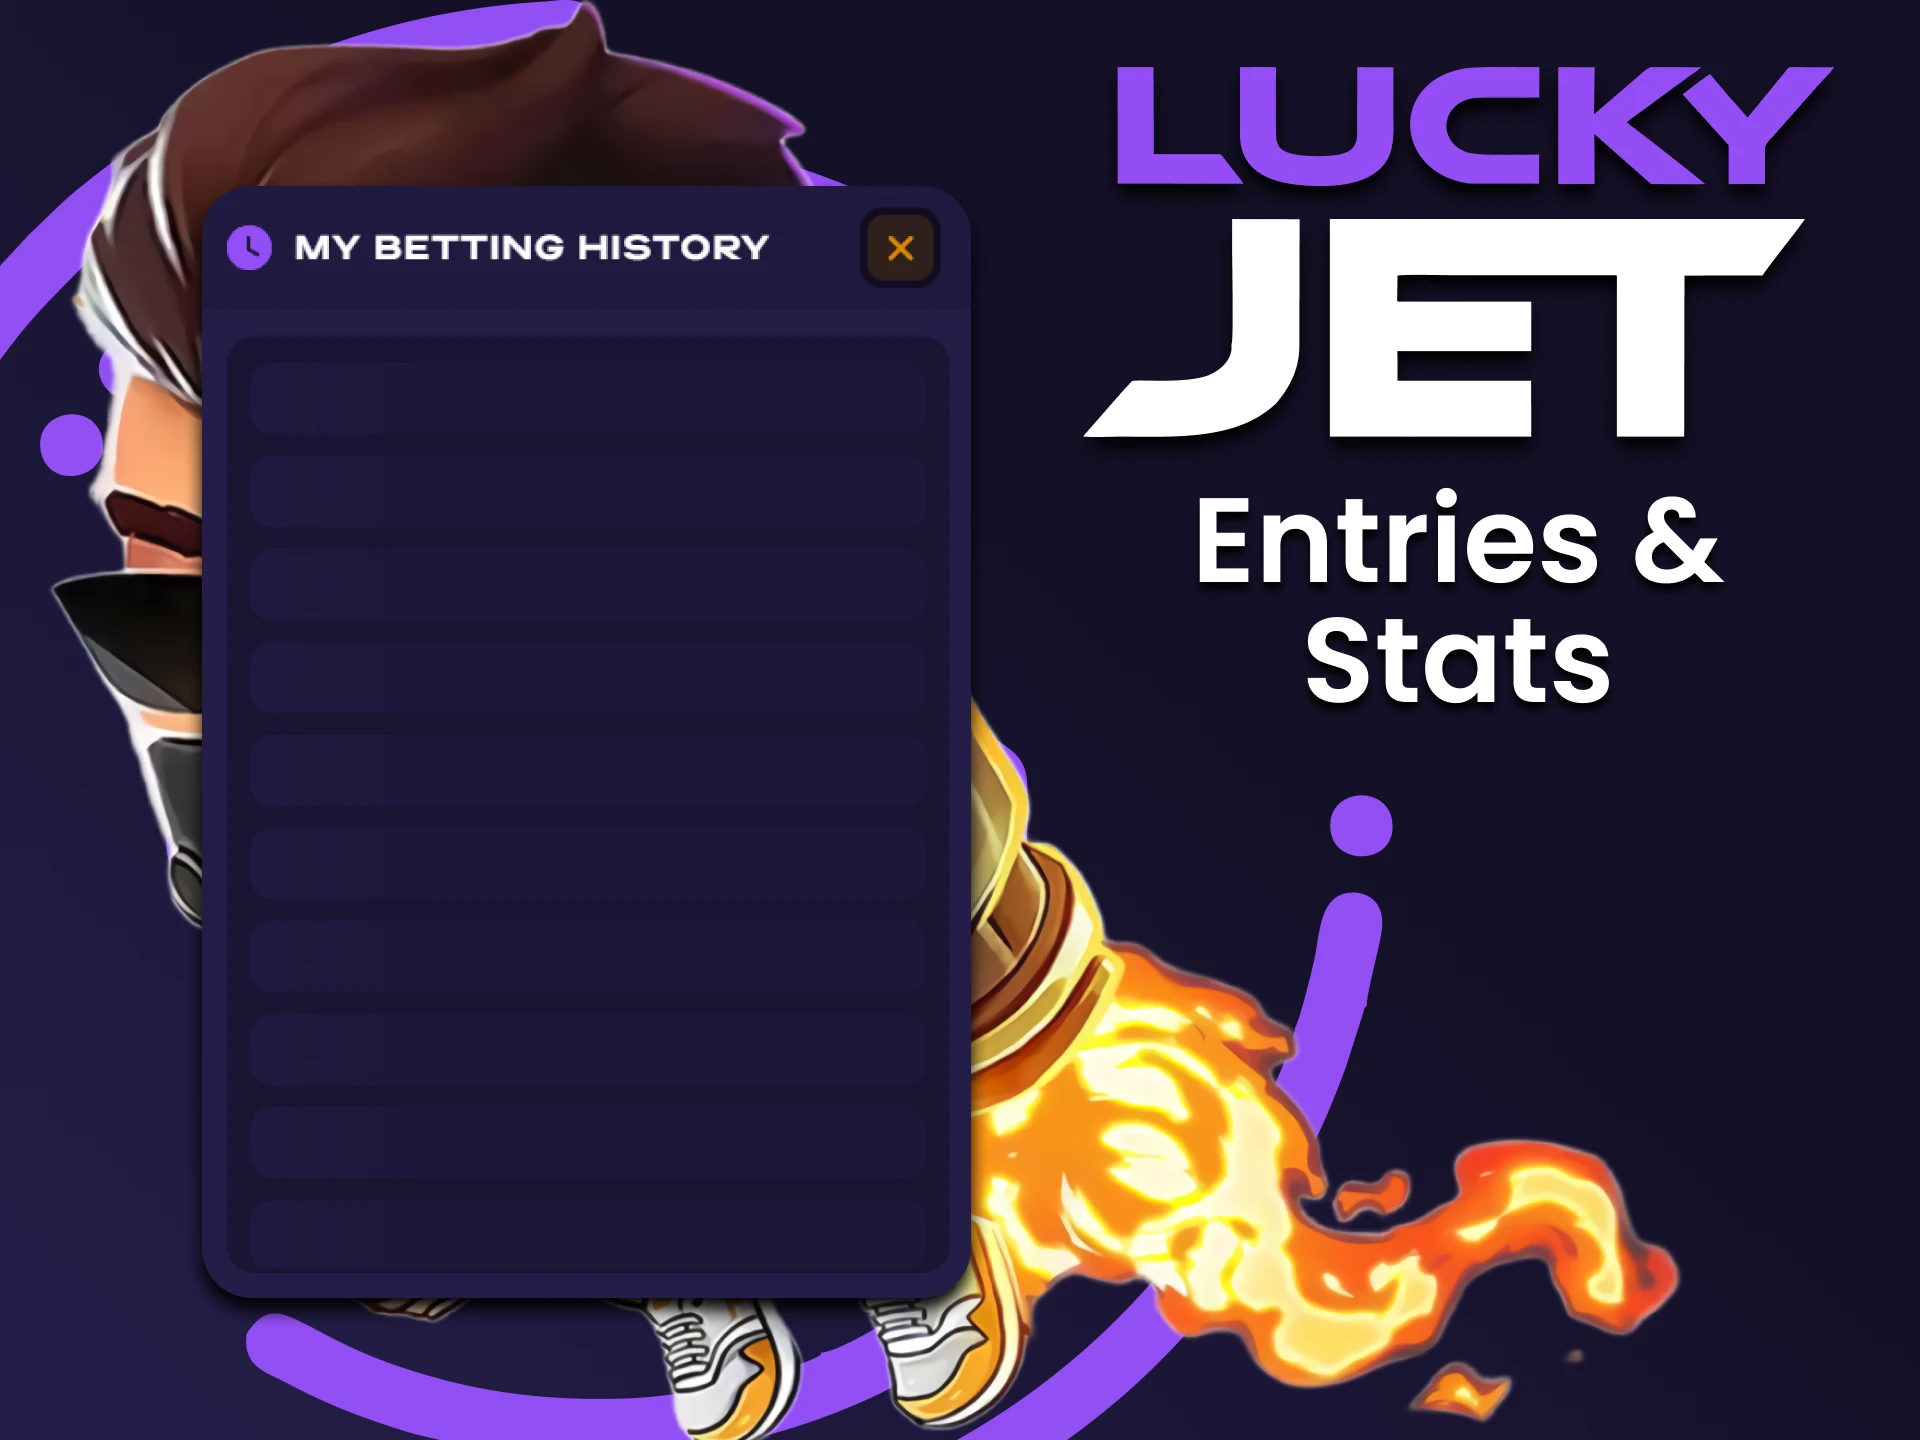 You can always track your results in the Lucky Jet game.